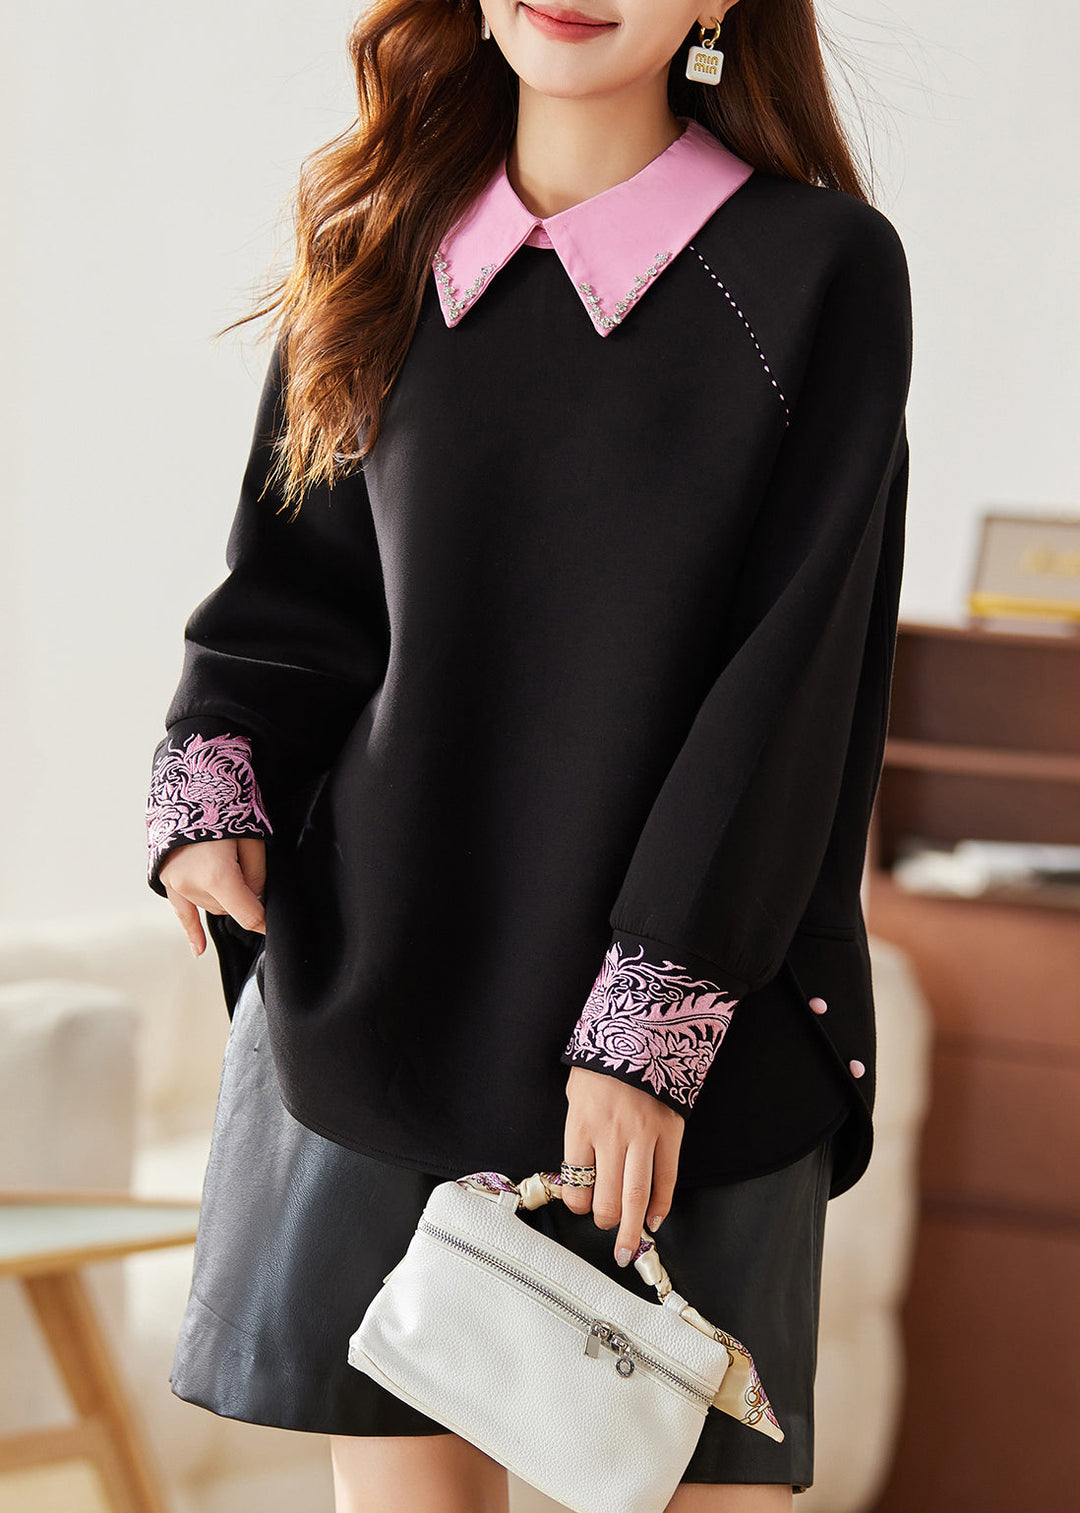 French Black Embroideried Patchwork Cotton Sweatshirts Spring